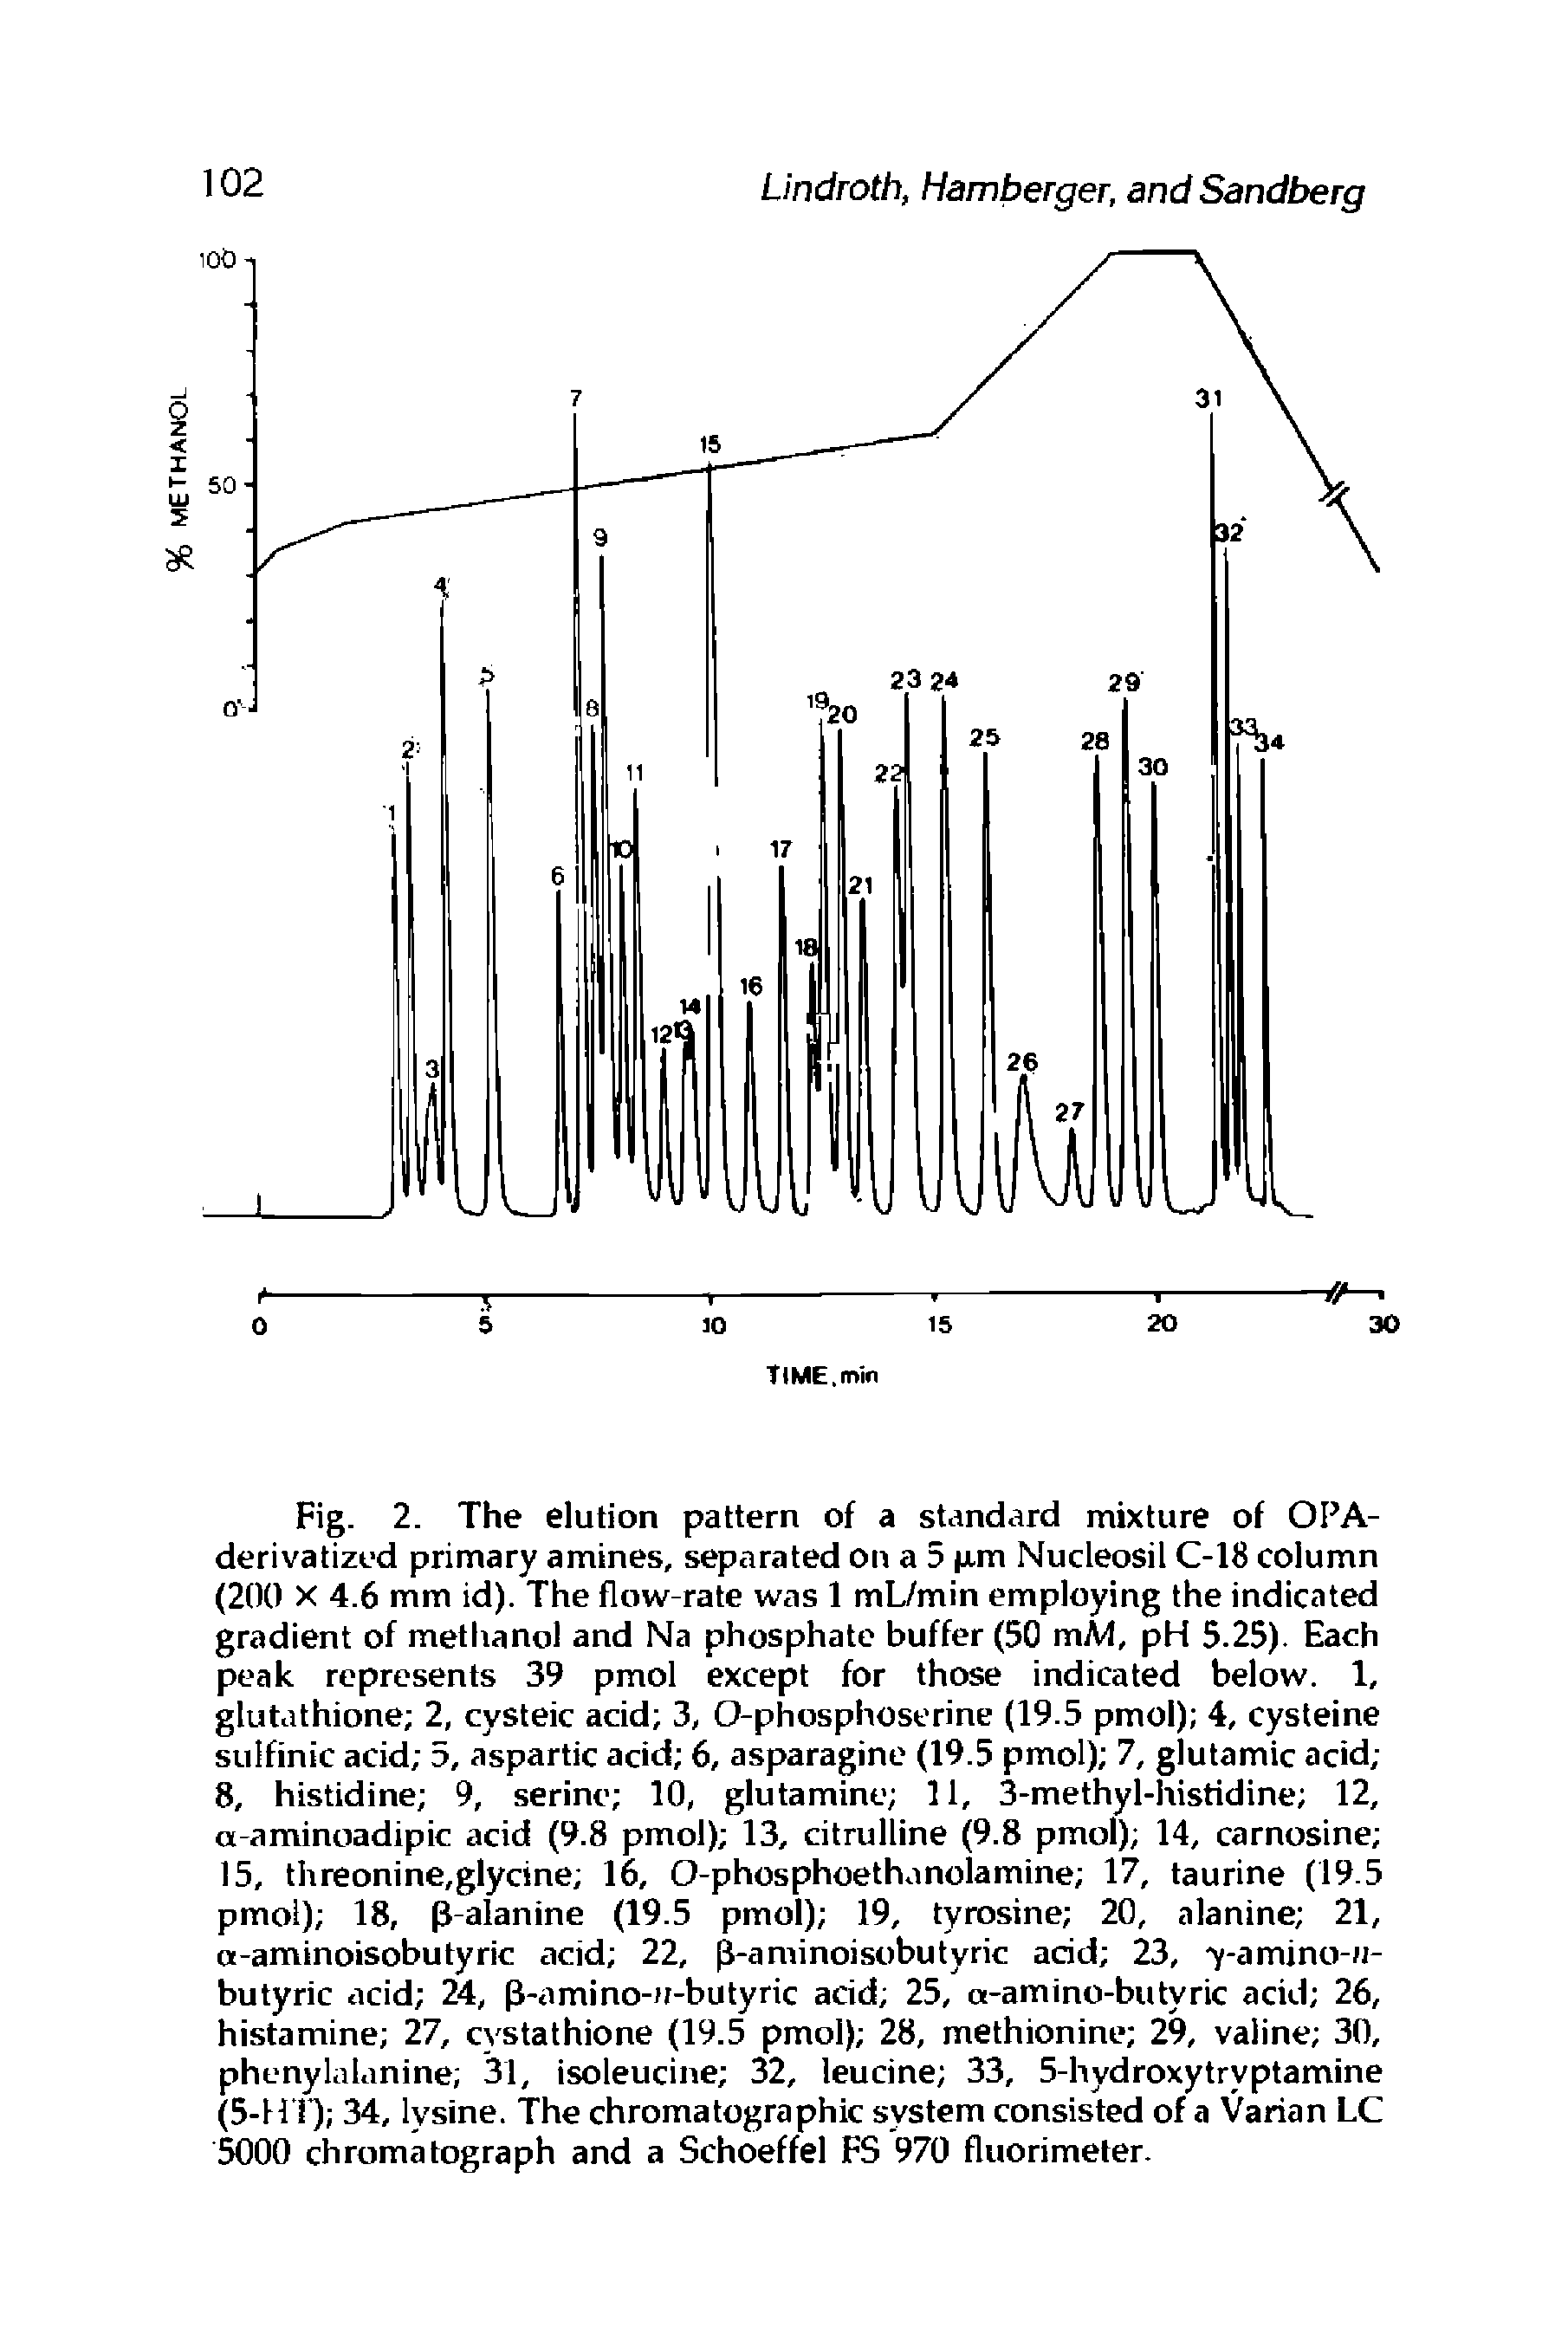 Fig. 2. The elution pattern of a standard mixture of OPA-derivatized primary amines, separated on a 5 (Jim Nucleosil C-18 column (200 X 4.6 mm id). The flow-rate was 1 mL/min employing the indicated gradient of metlianol and Na phosphate buffer (50 mA4, pH 5.25). Each peak represents 39 pmol except for those indicated below. 1, glutathione 2, cysteic acid 3, O-phosphoserine (19.5 pmol) 4, cysteine sulfinic acid 5, aspartic acid 6, asparagine (19.5 pmol) 7, glutamic acid 8, histidine 9, serine 10, glutamine 11, 3-methyl-histidine 12, a-aminoadipic acid (9.8 pmol) 13, citrulline (9.8 pmol) 14, carnosine 15, threonine,glycine 16, O-phosphoethanolamine 17, taurine (19.5 pmol) 18, p-alanine (19.5 pmol) 19, tyrosine 20, alanine 21, a-aminoisobutyric acid 22, aminoisobutyric acid 23, y-amino-ii-butyric acid 24, p-amino-u-butyric acid 25, a-amino-butyric acid 26, histamine 27, cystathione (19.5 pmol) 28, methionine 29, valine 30, phenylalanine 31, isoleucine 32, leucine 33, 5-hydroxytryptamine (5-H i ) 34, lysine. The chromatographic system consisted of a Varian LC 5000 chromatograph and a Schoeffel FS 970 fluorimeter.